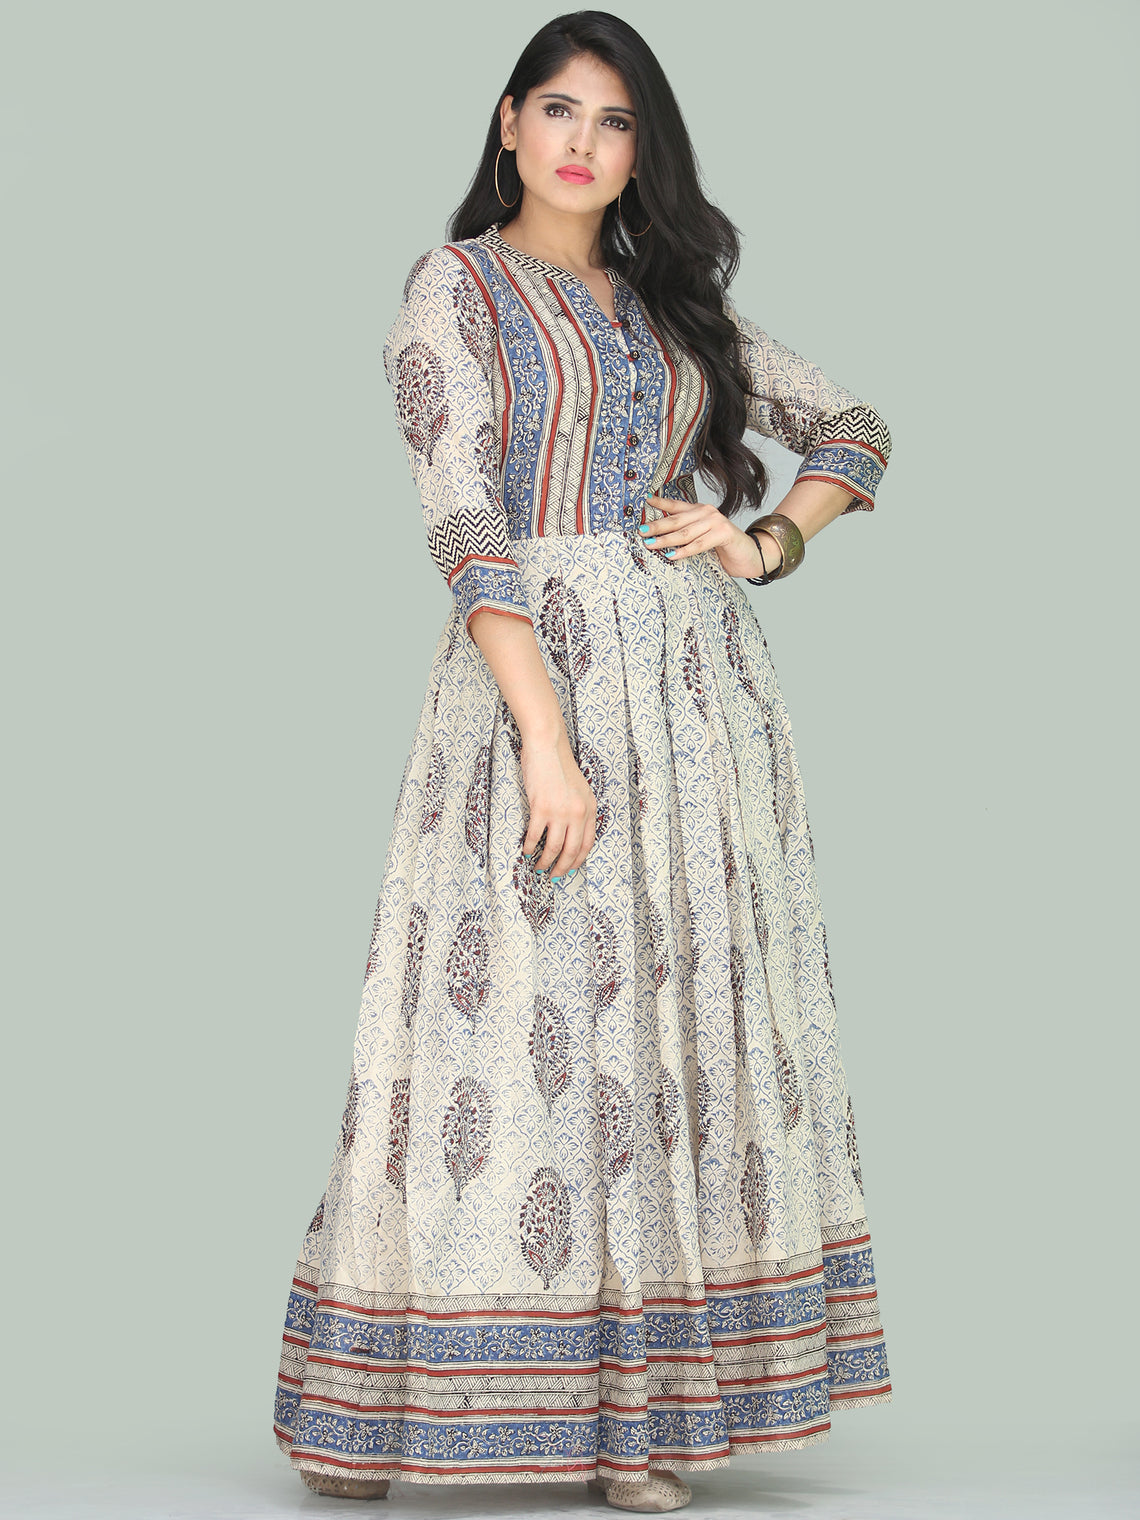 Naaz Minaz - Hand Block Printed Long Cotton Dress With Lining - DS111F ...